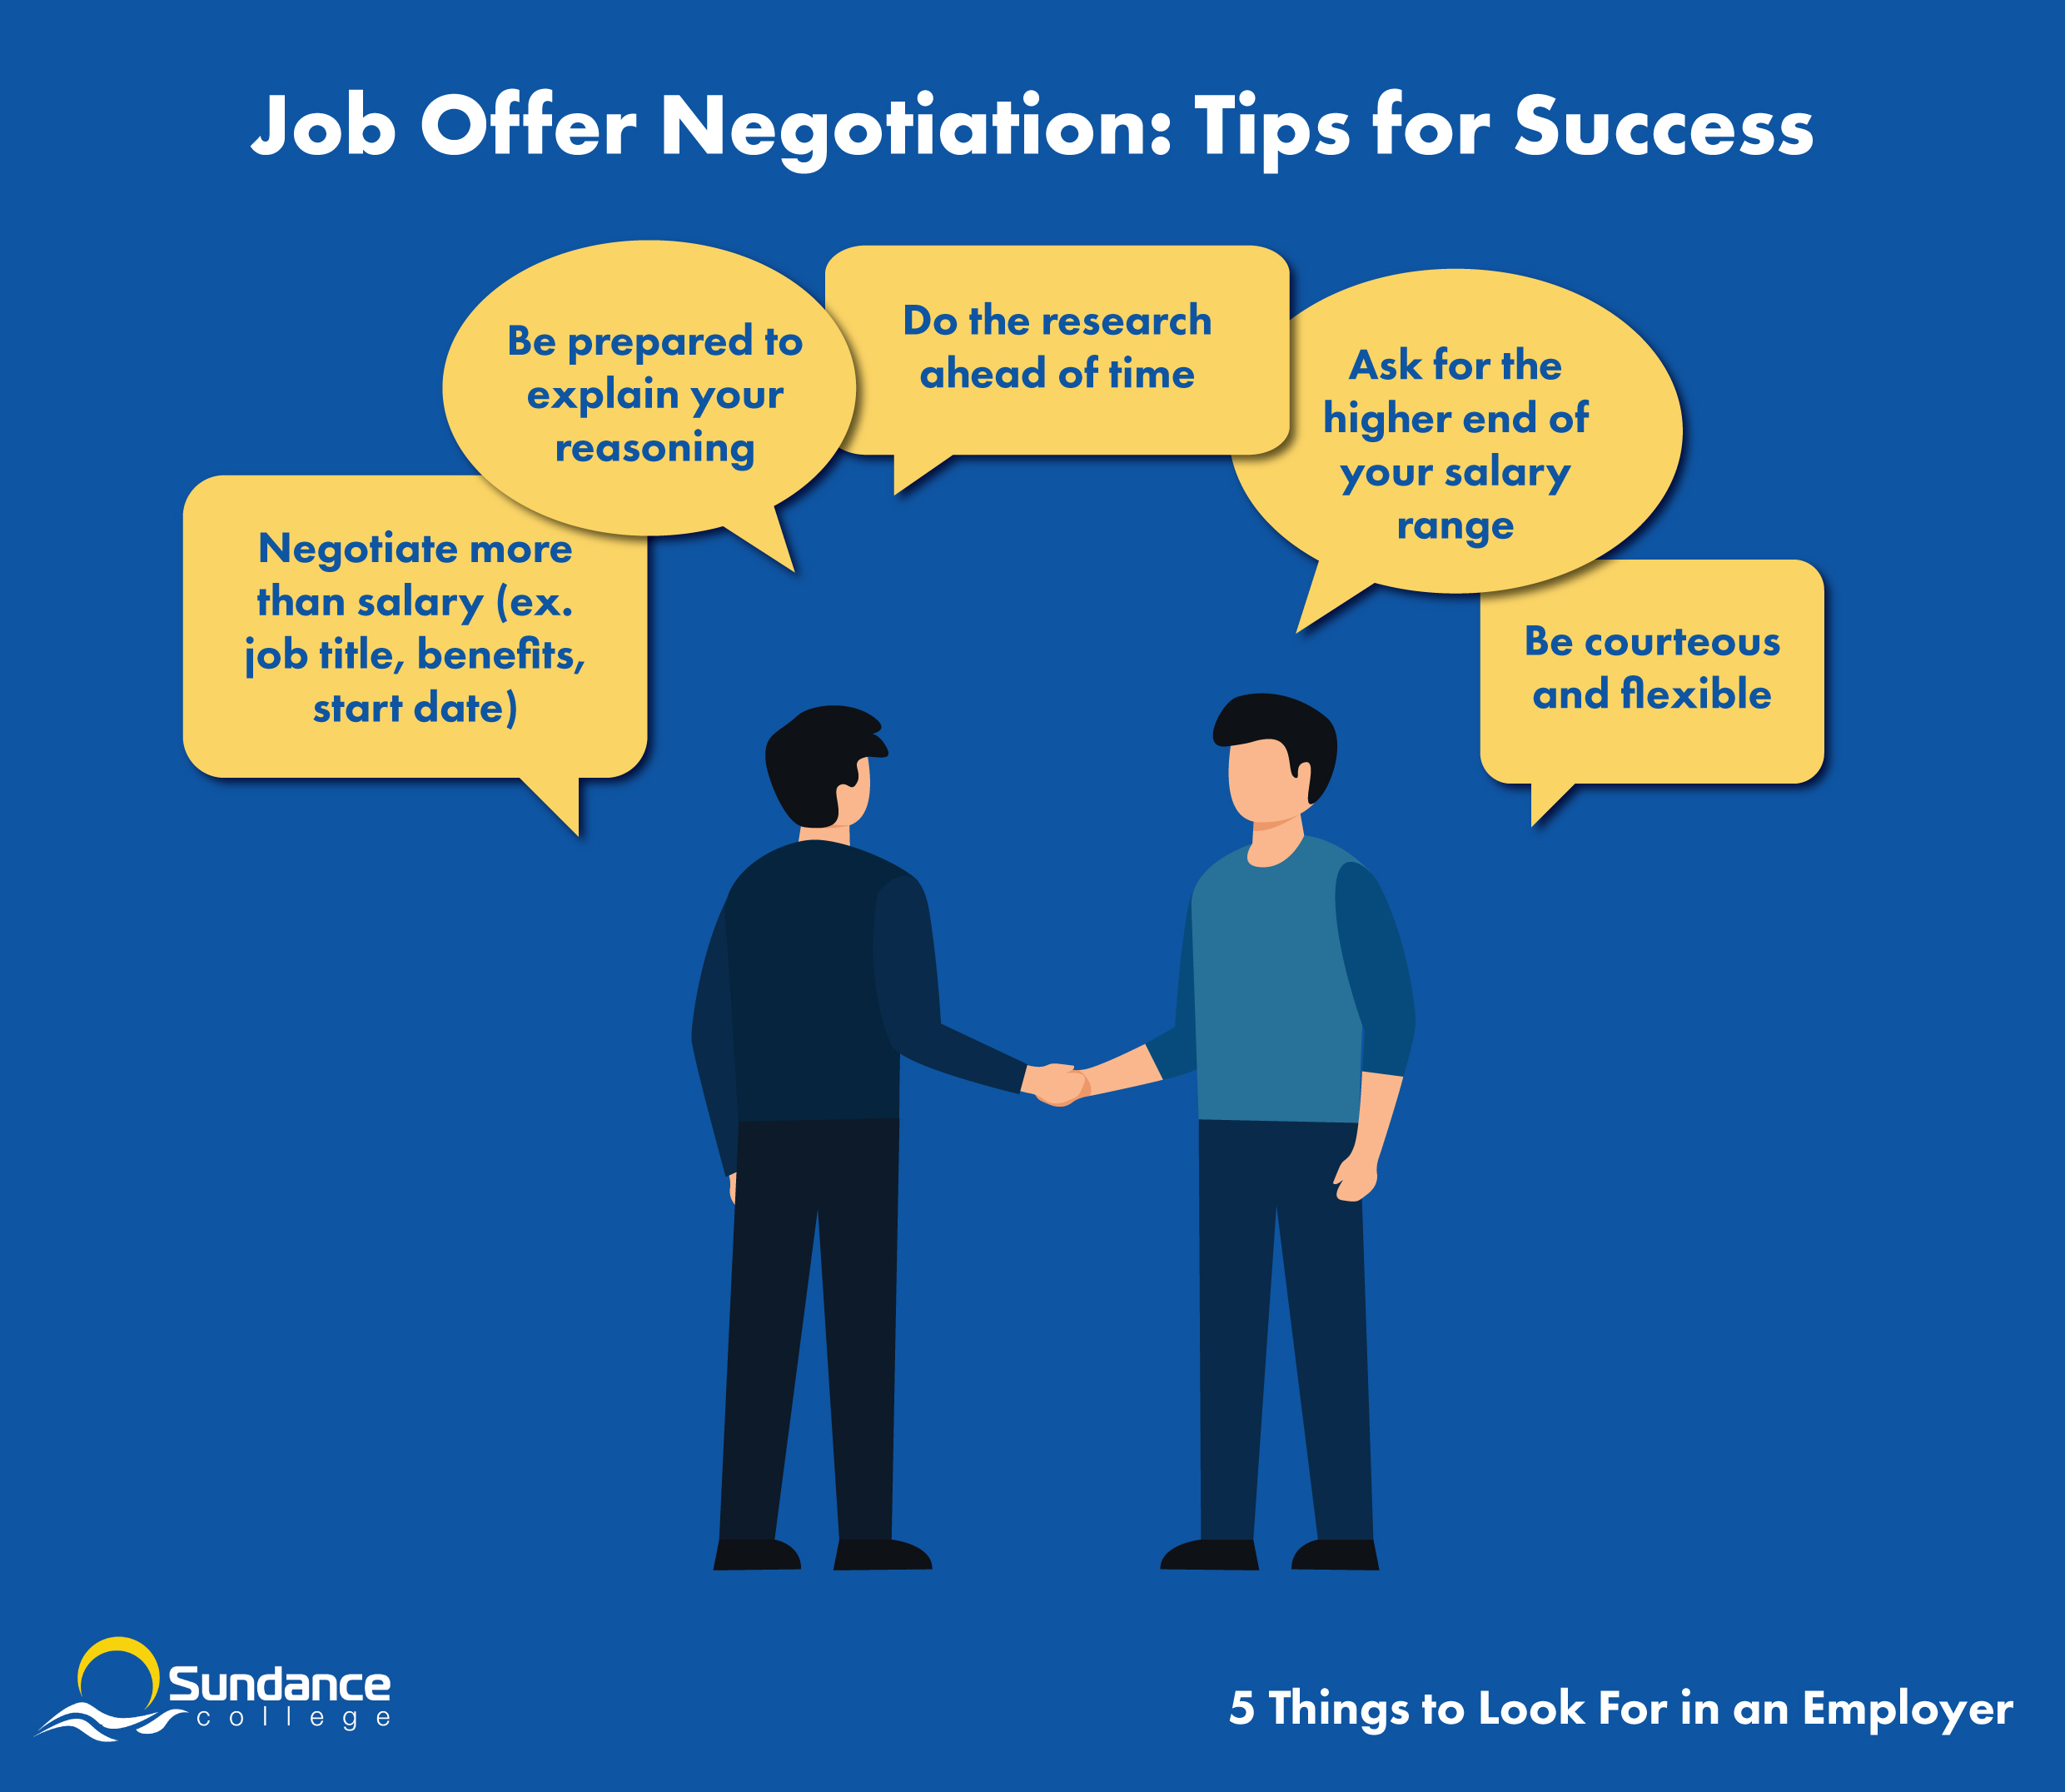 Infographic with job offer negotiation tips: negotiate more than salary, explain your reasoning, do the research, ask for the higher end of your salary range, and be courteous and flexible.